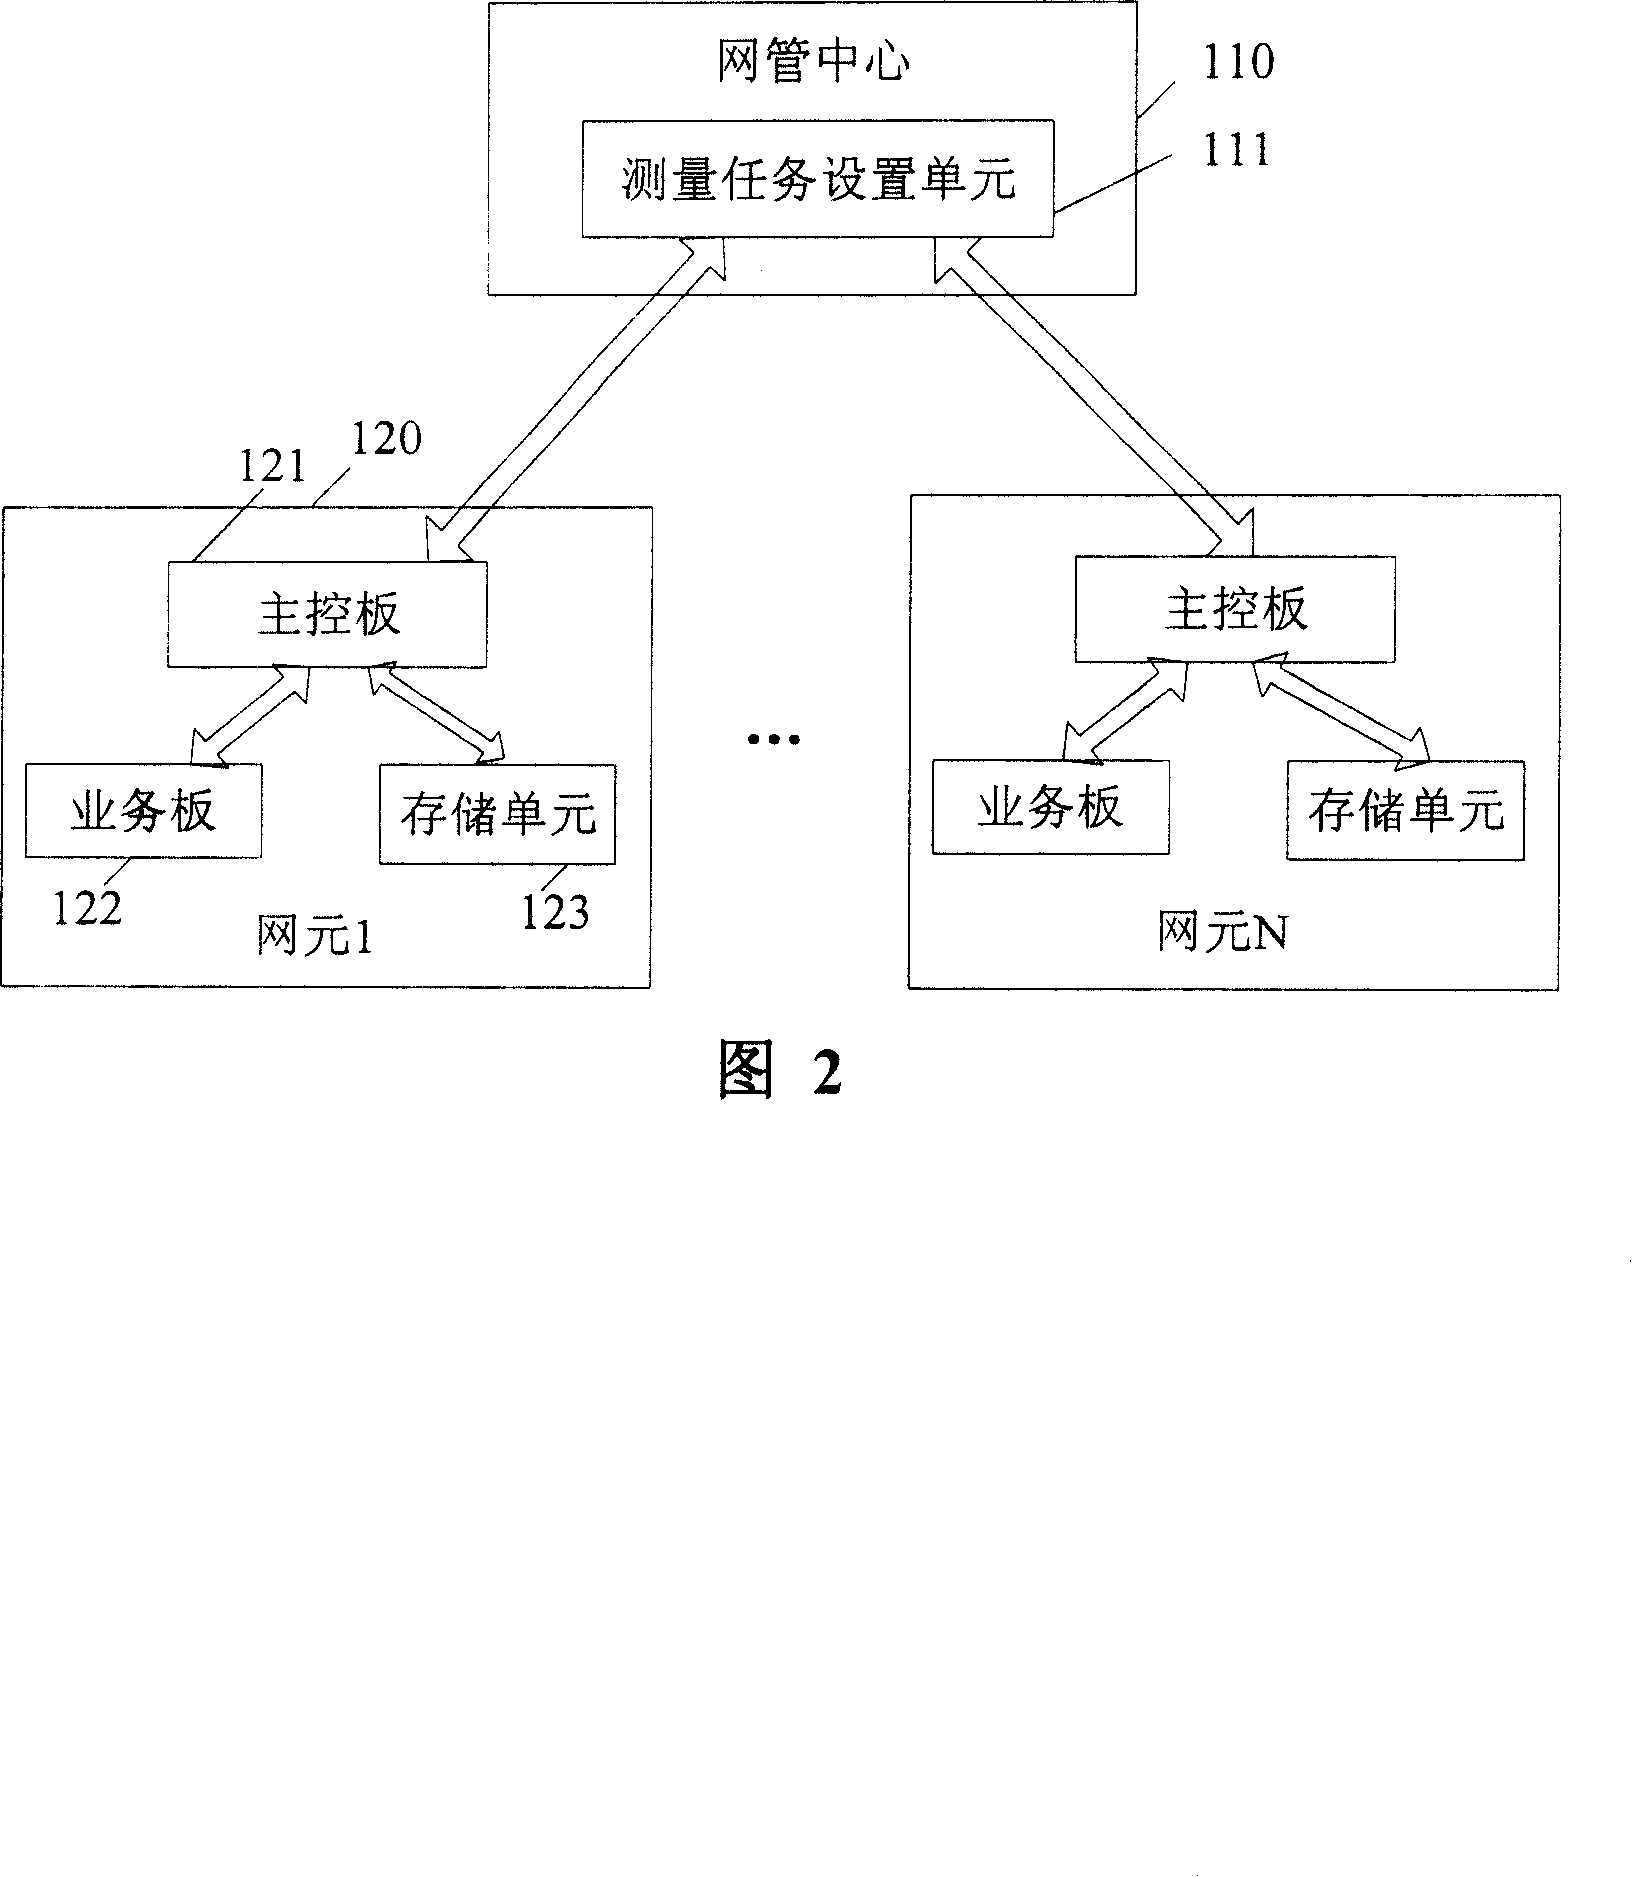 Network performance measuring method and system